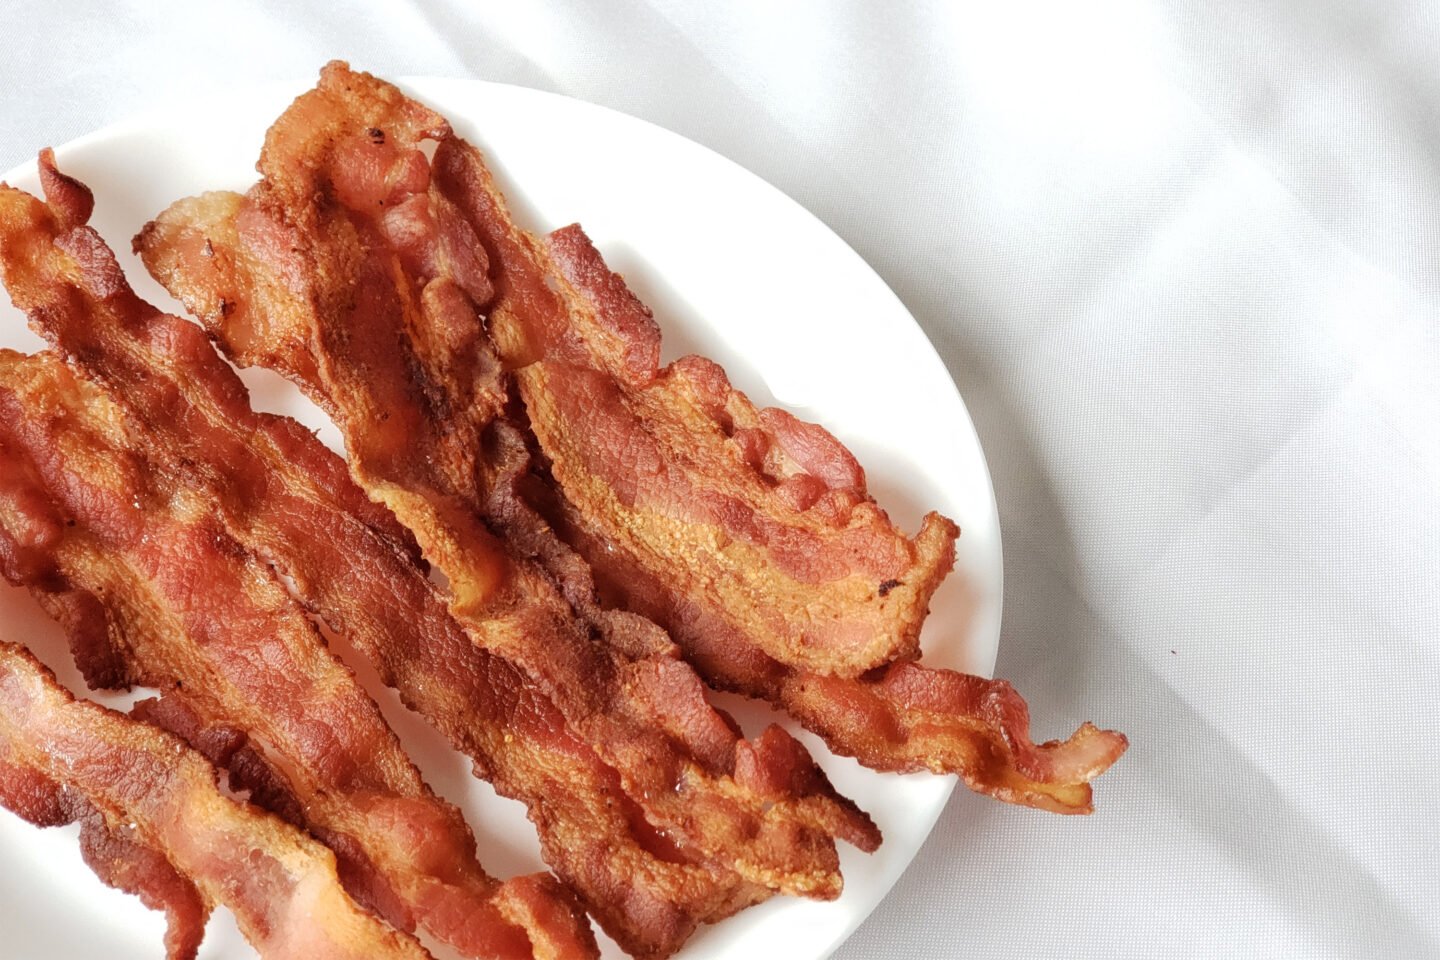 strips of bacon freshly fried served on a plate